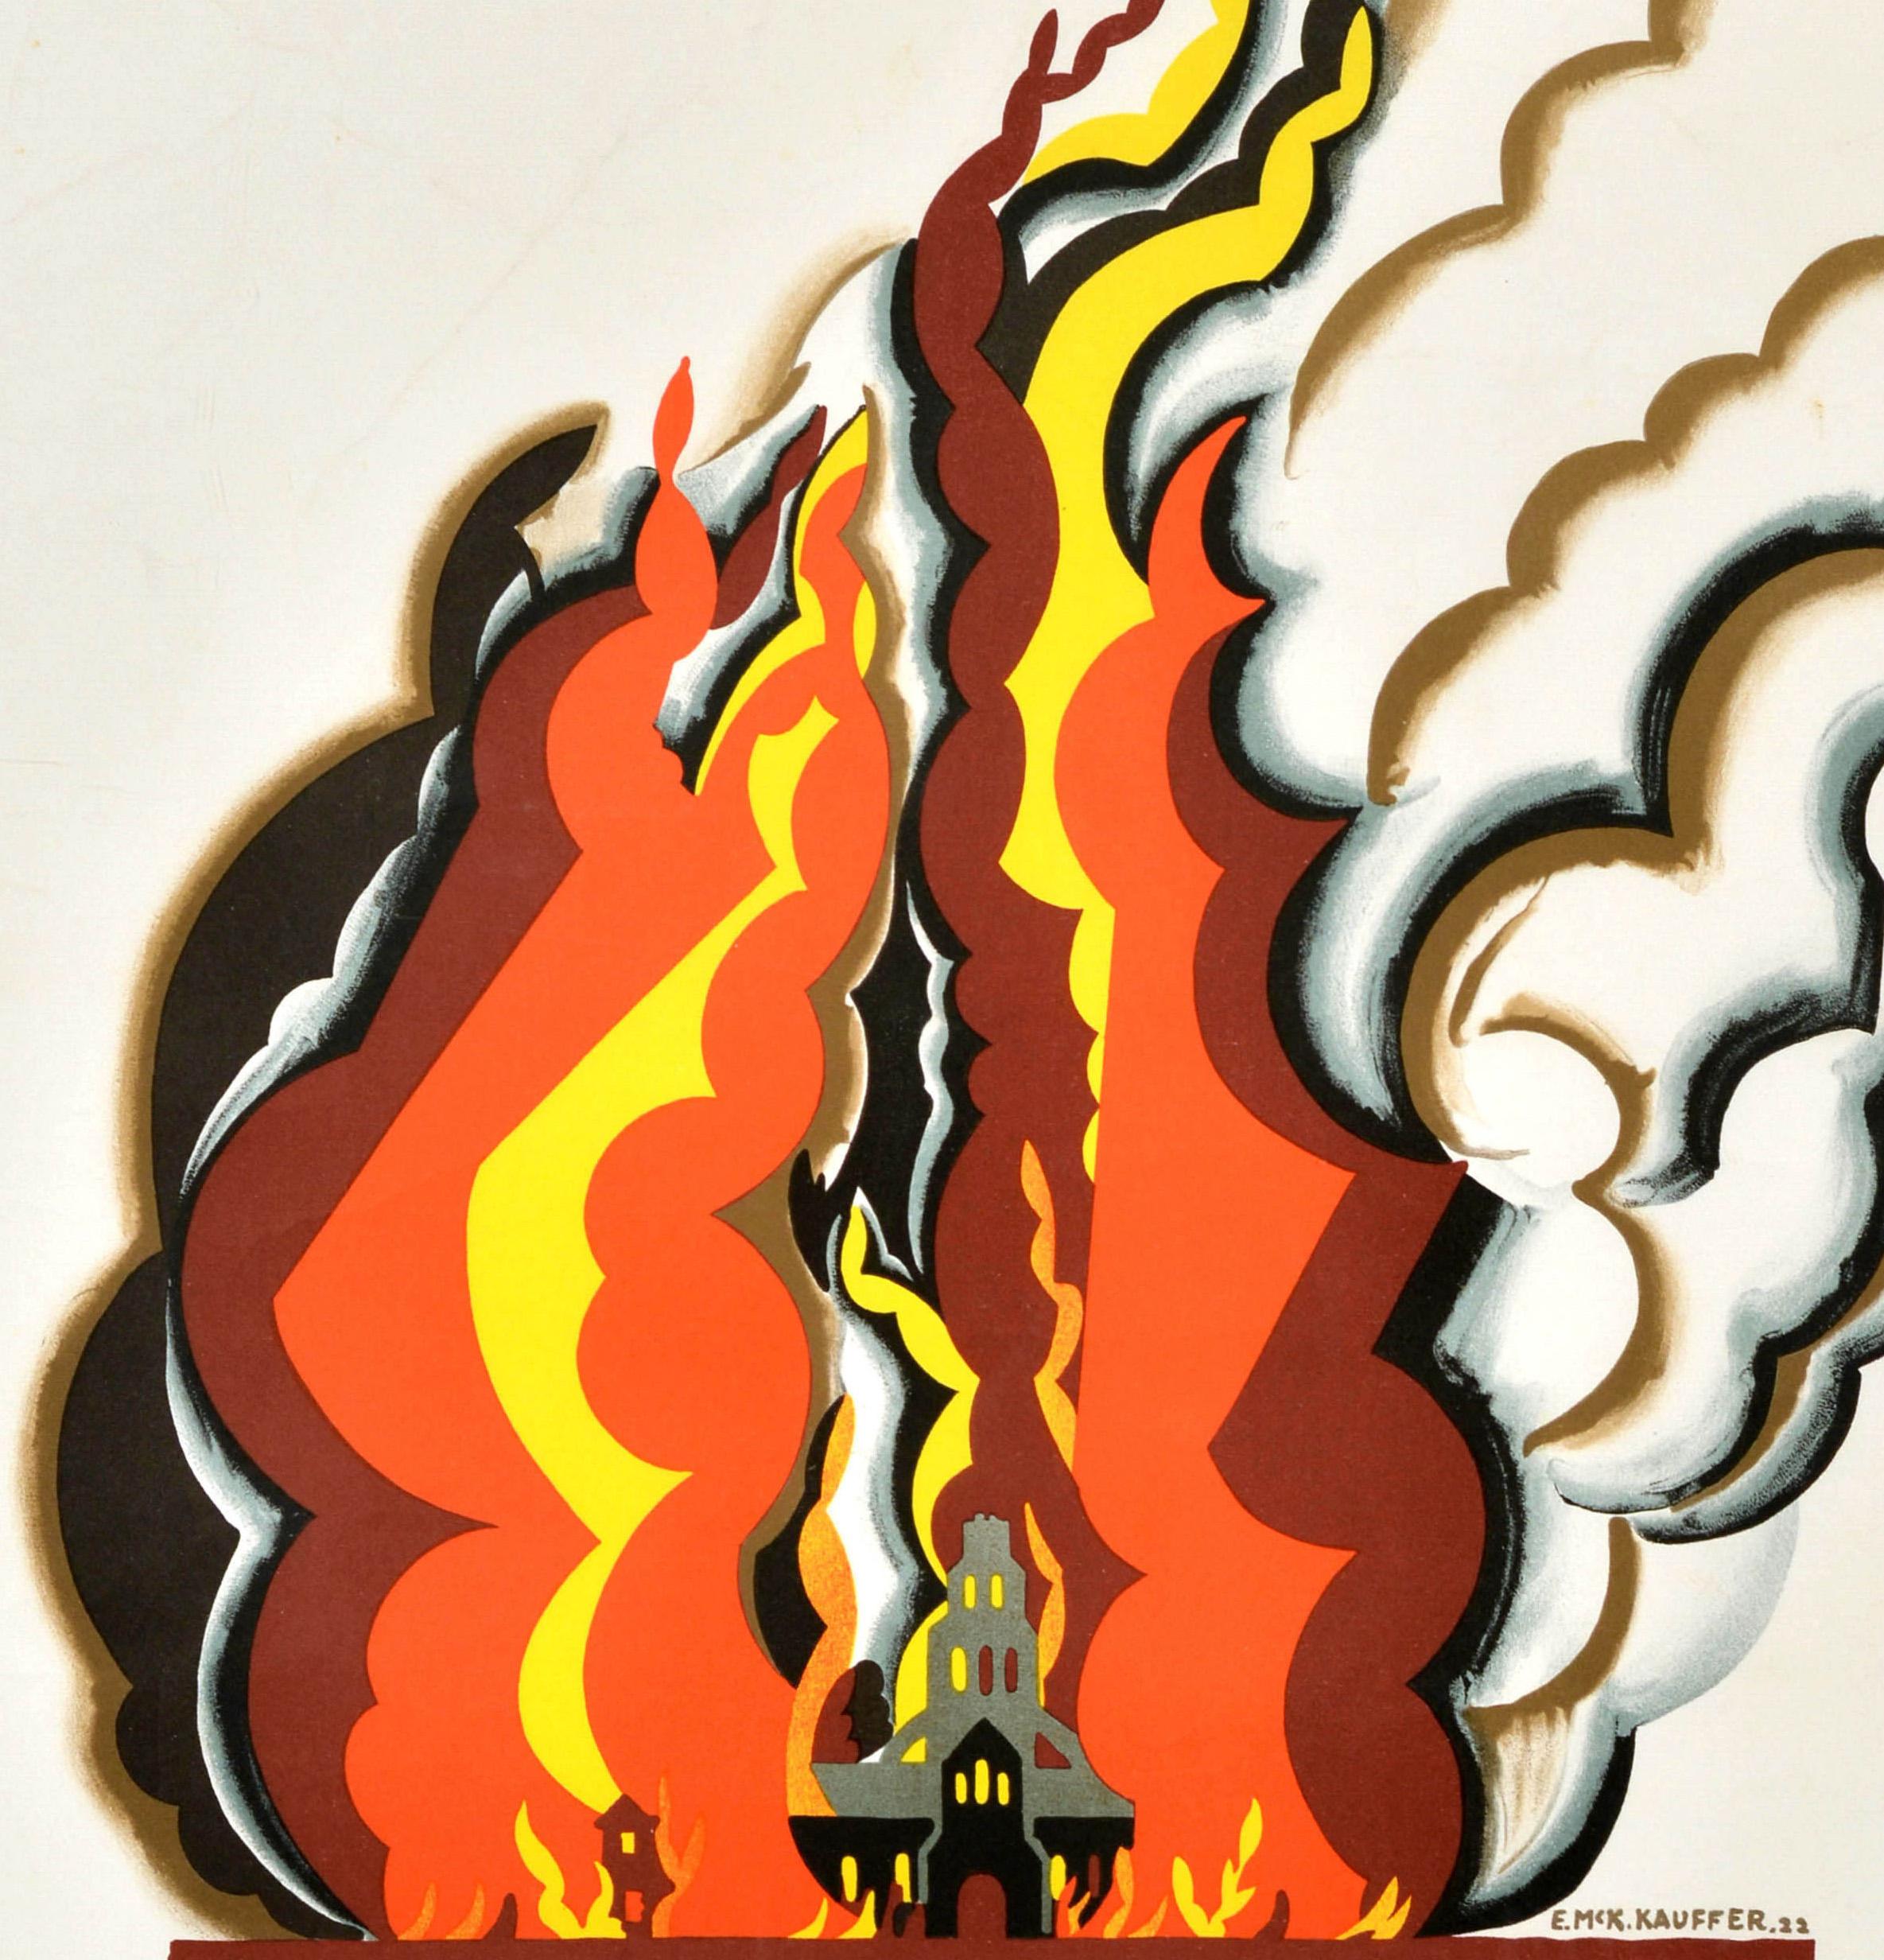 Vintage official reproduction poster issued for London Underground featuring artwork by one of the most renowned poster artists of the 20th century Edward McKnight Kauffer (1890-1954) of the Great Fire of London with the bright orange, red and